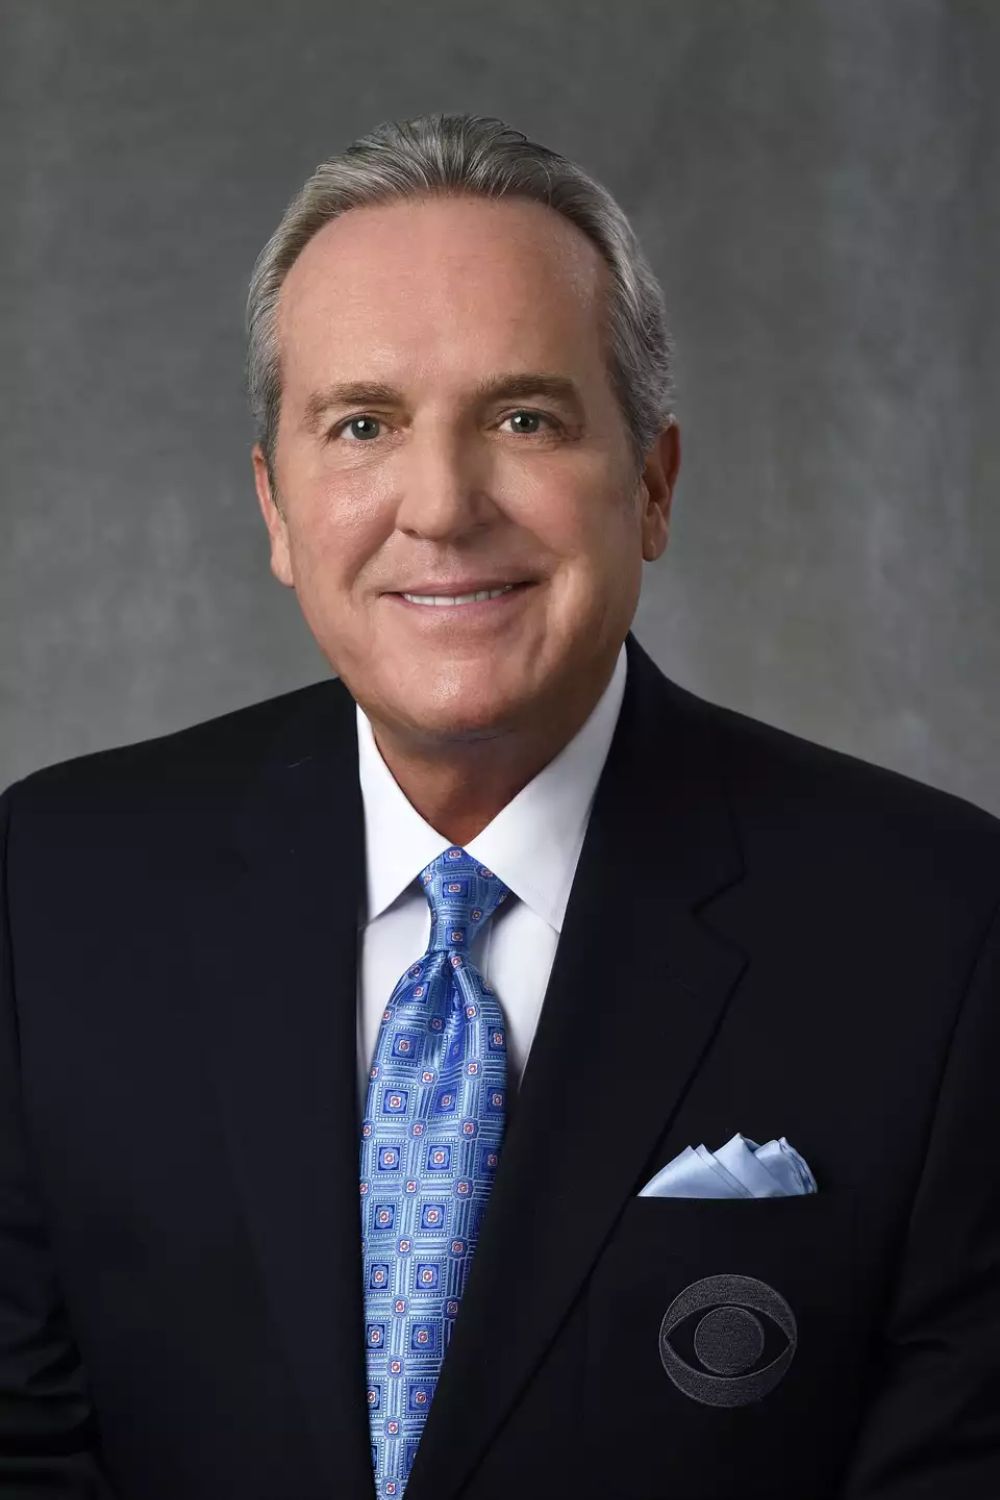 Brad Nessler Was Inducted To Minnesota State University Hall Of Fame In 2011